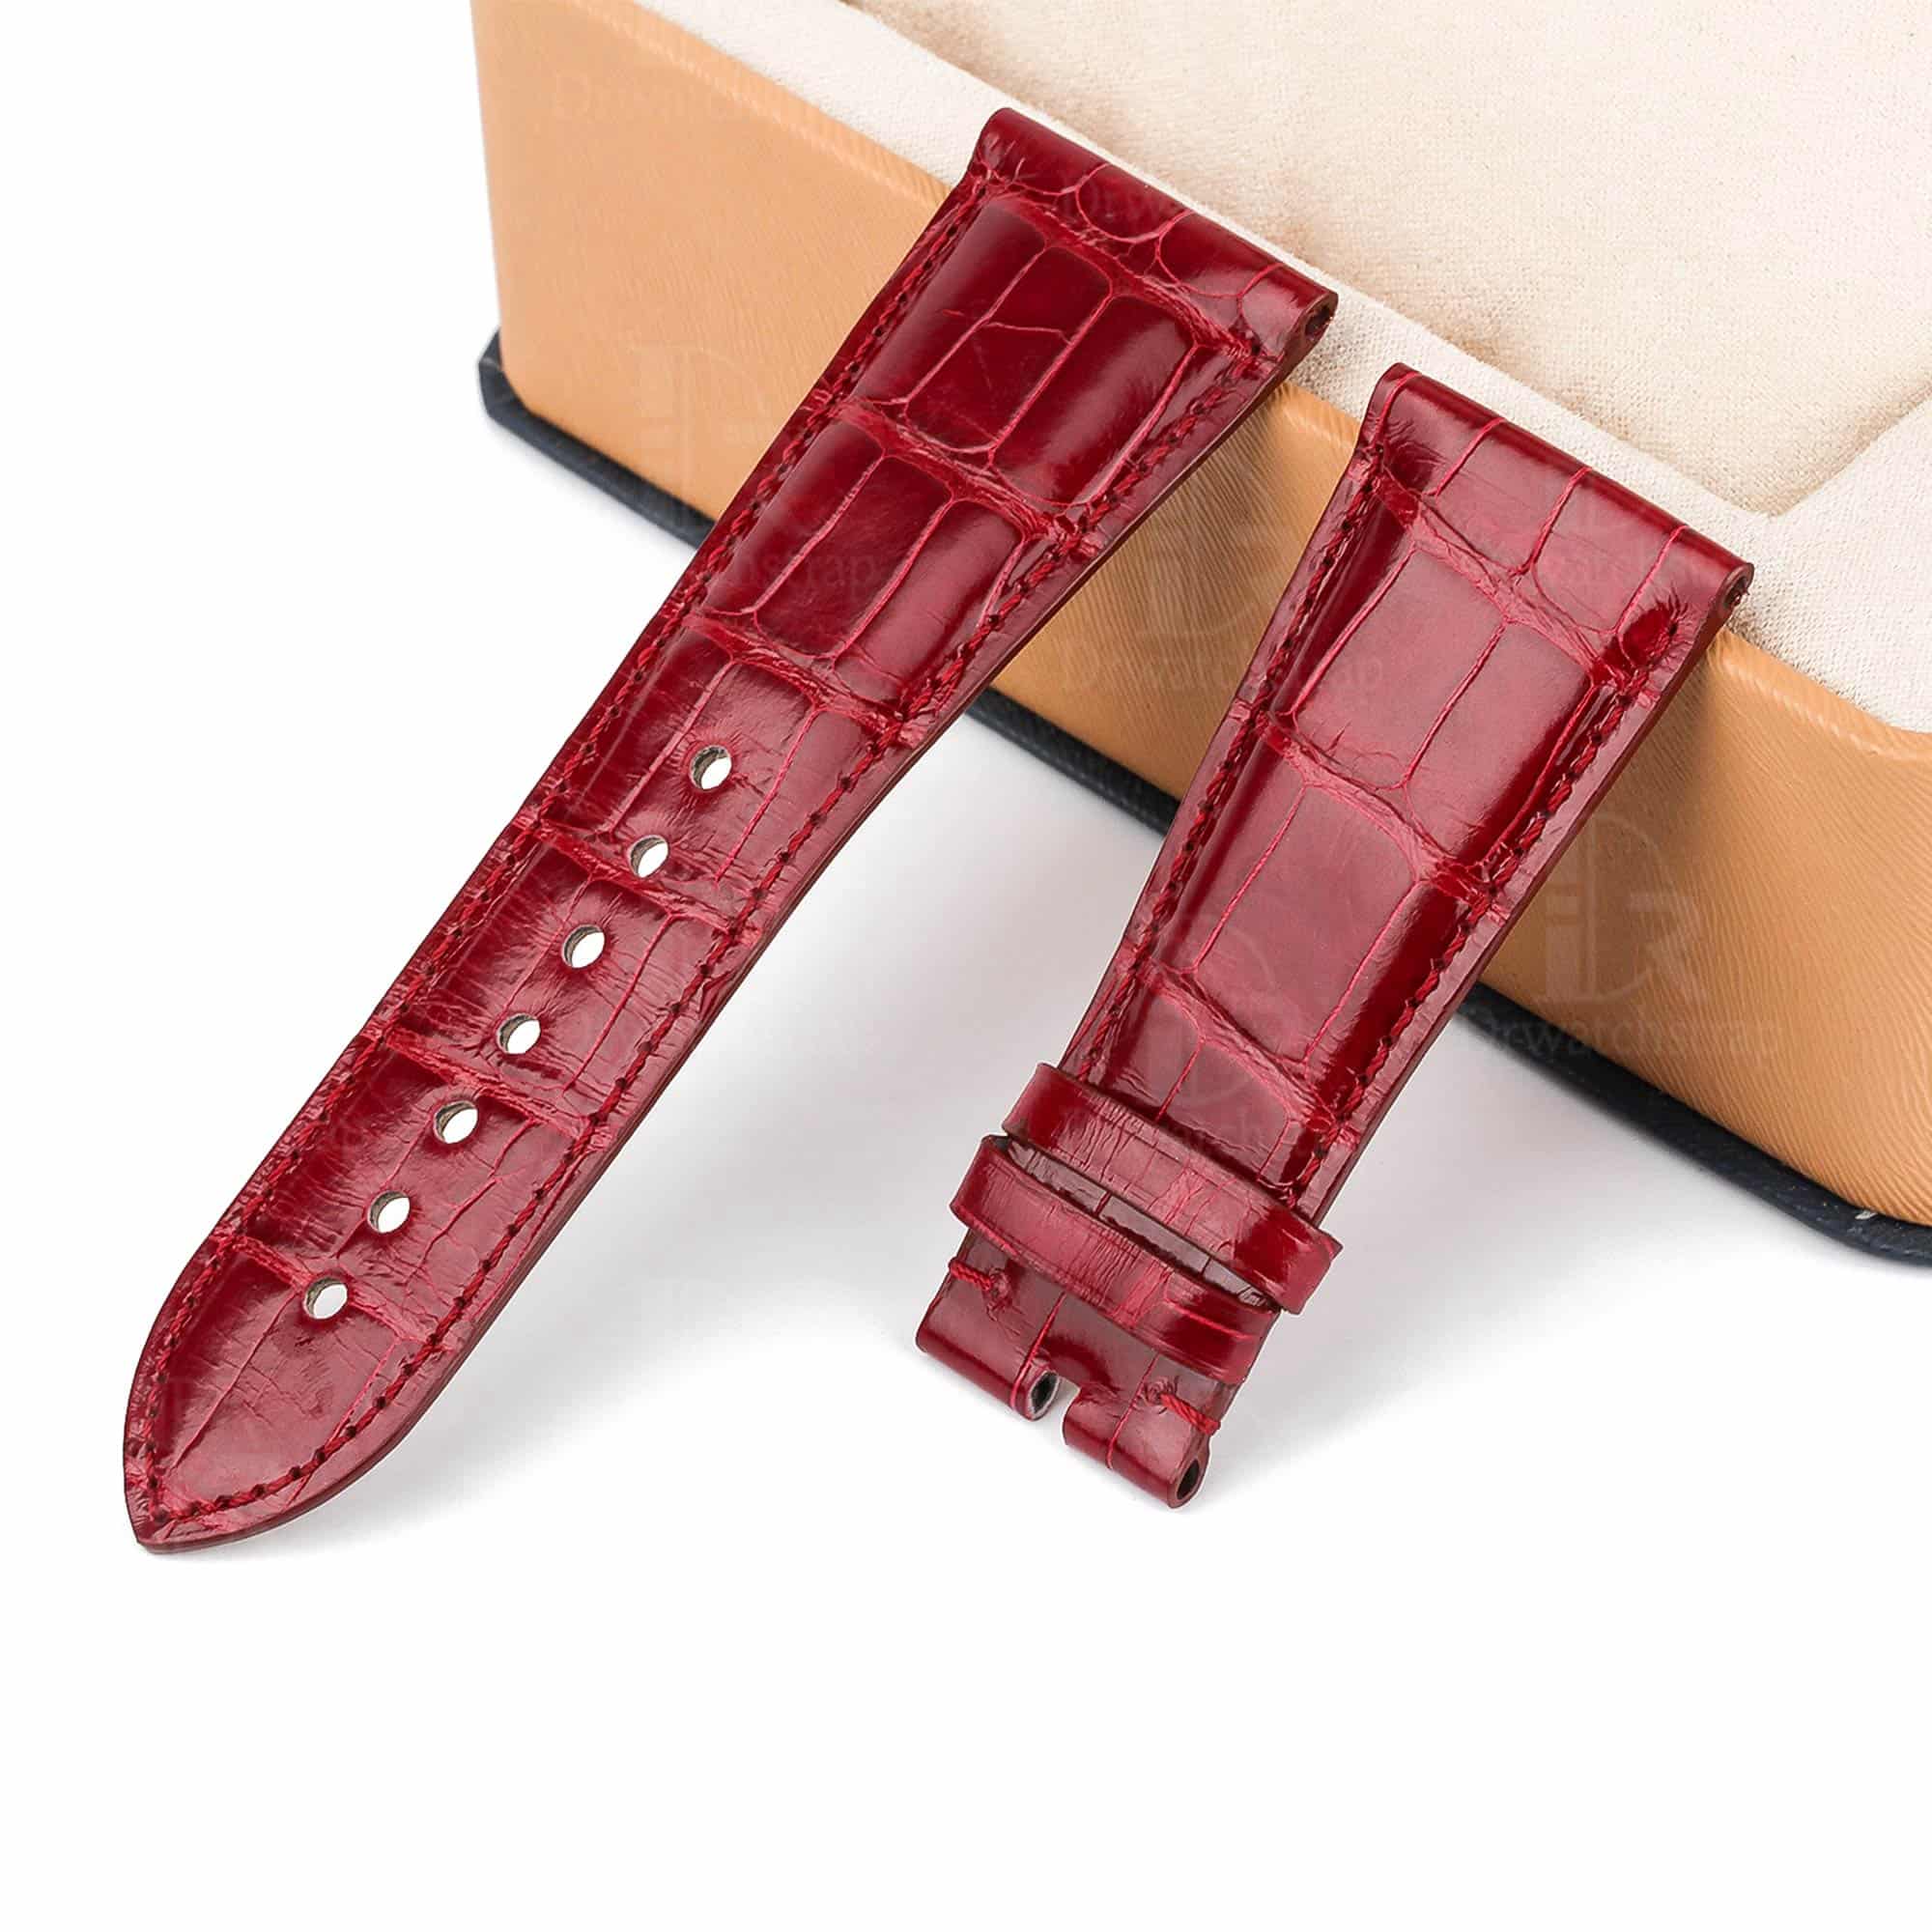 Genuine high-end quality custom OEM red Alligator leather watch strap & watchband replacement for Cartier Tank Divan men's and ladies' luxury watches - 100% handmade custom best quality Grade A Crocodile Cartier straps and watchbands from DR Watchstrap at low price